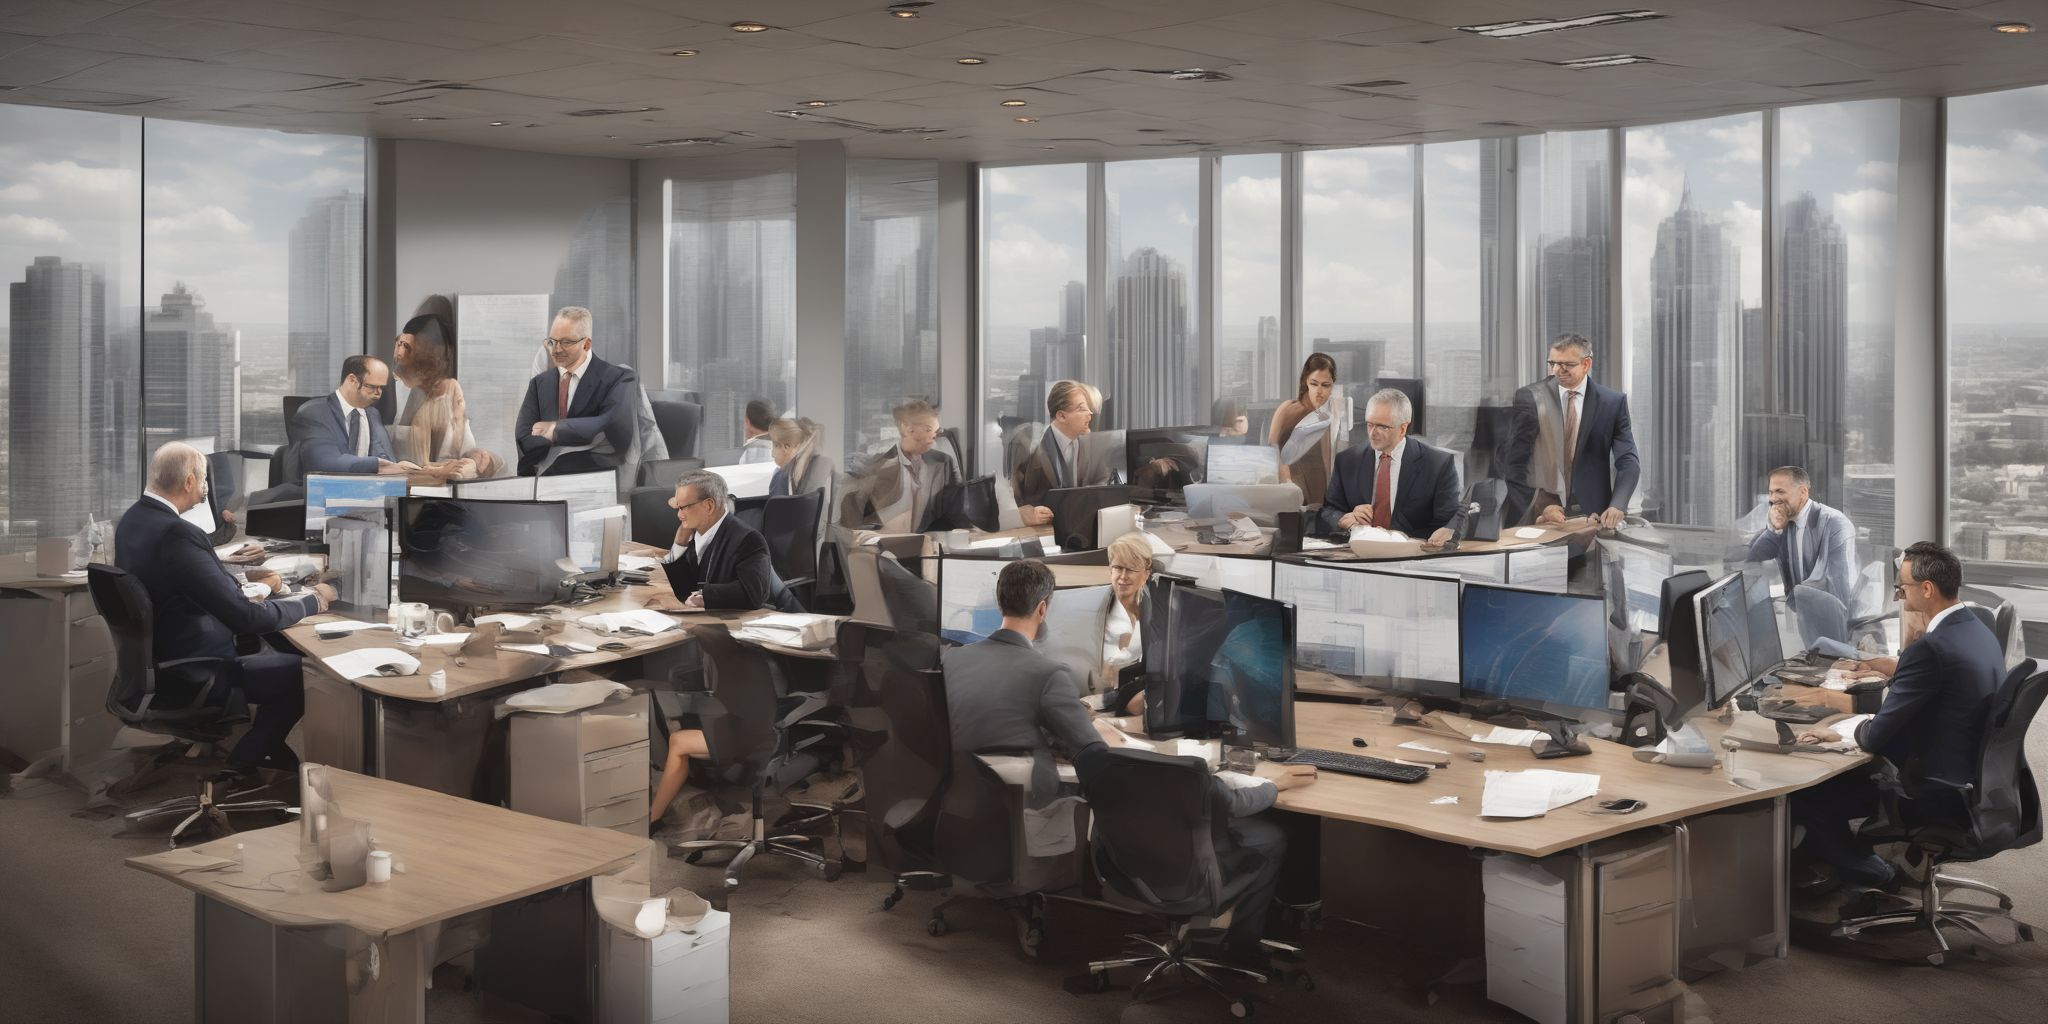 Brokers  in realistic, photographic style